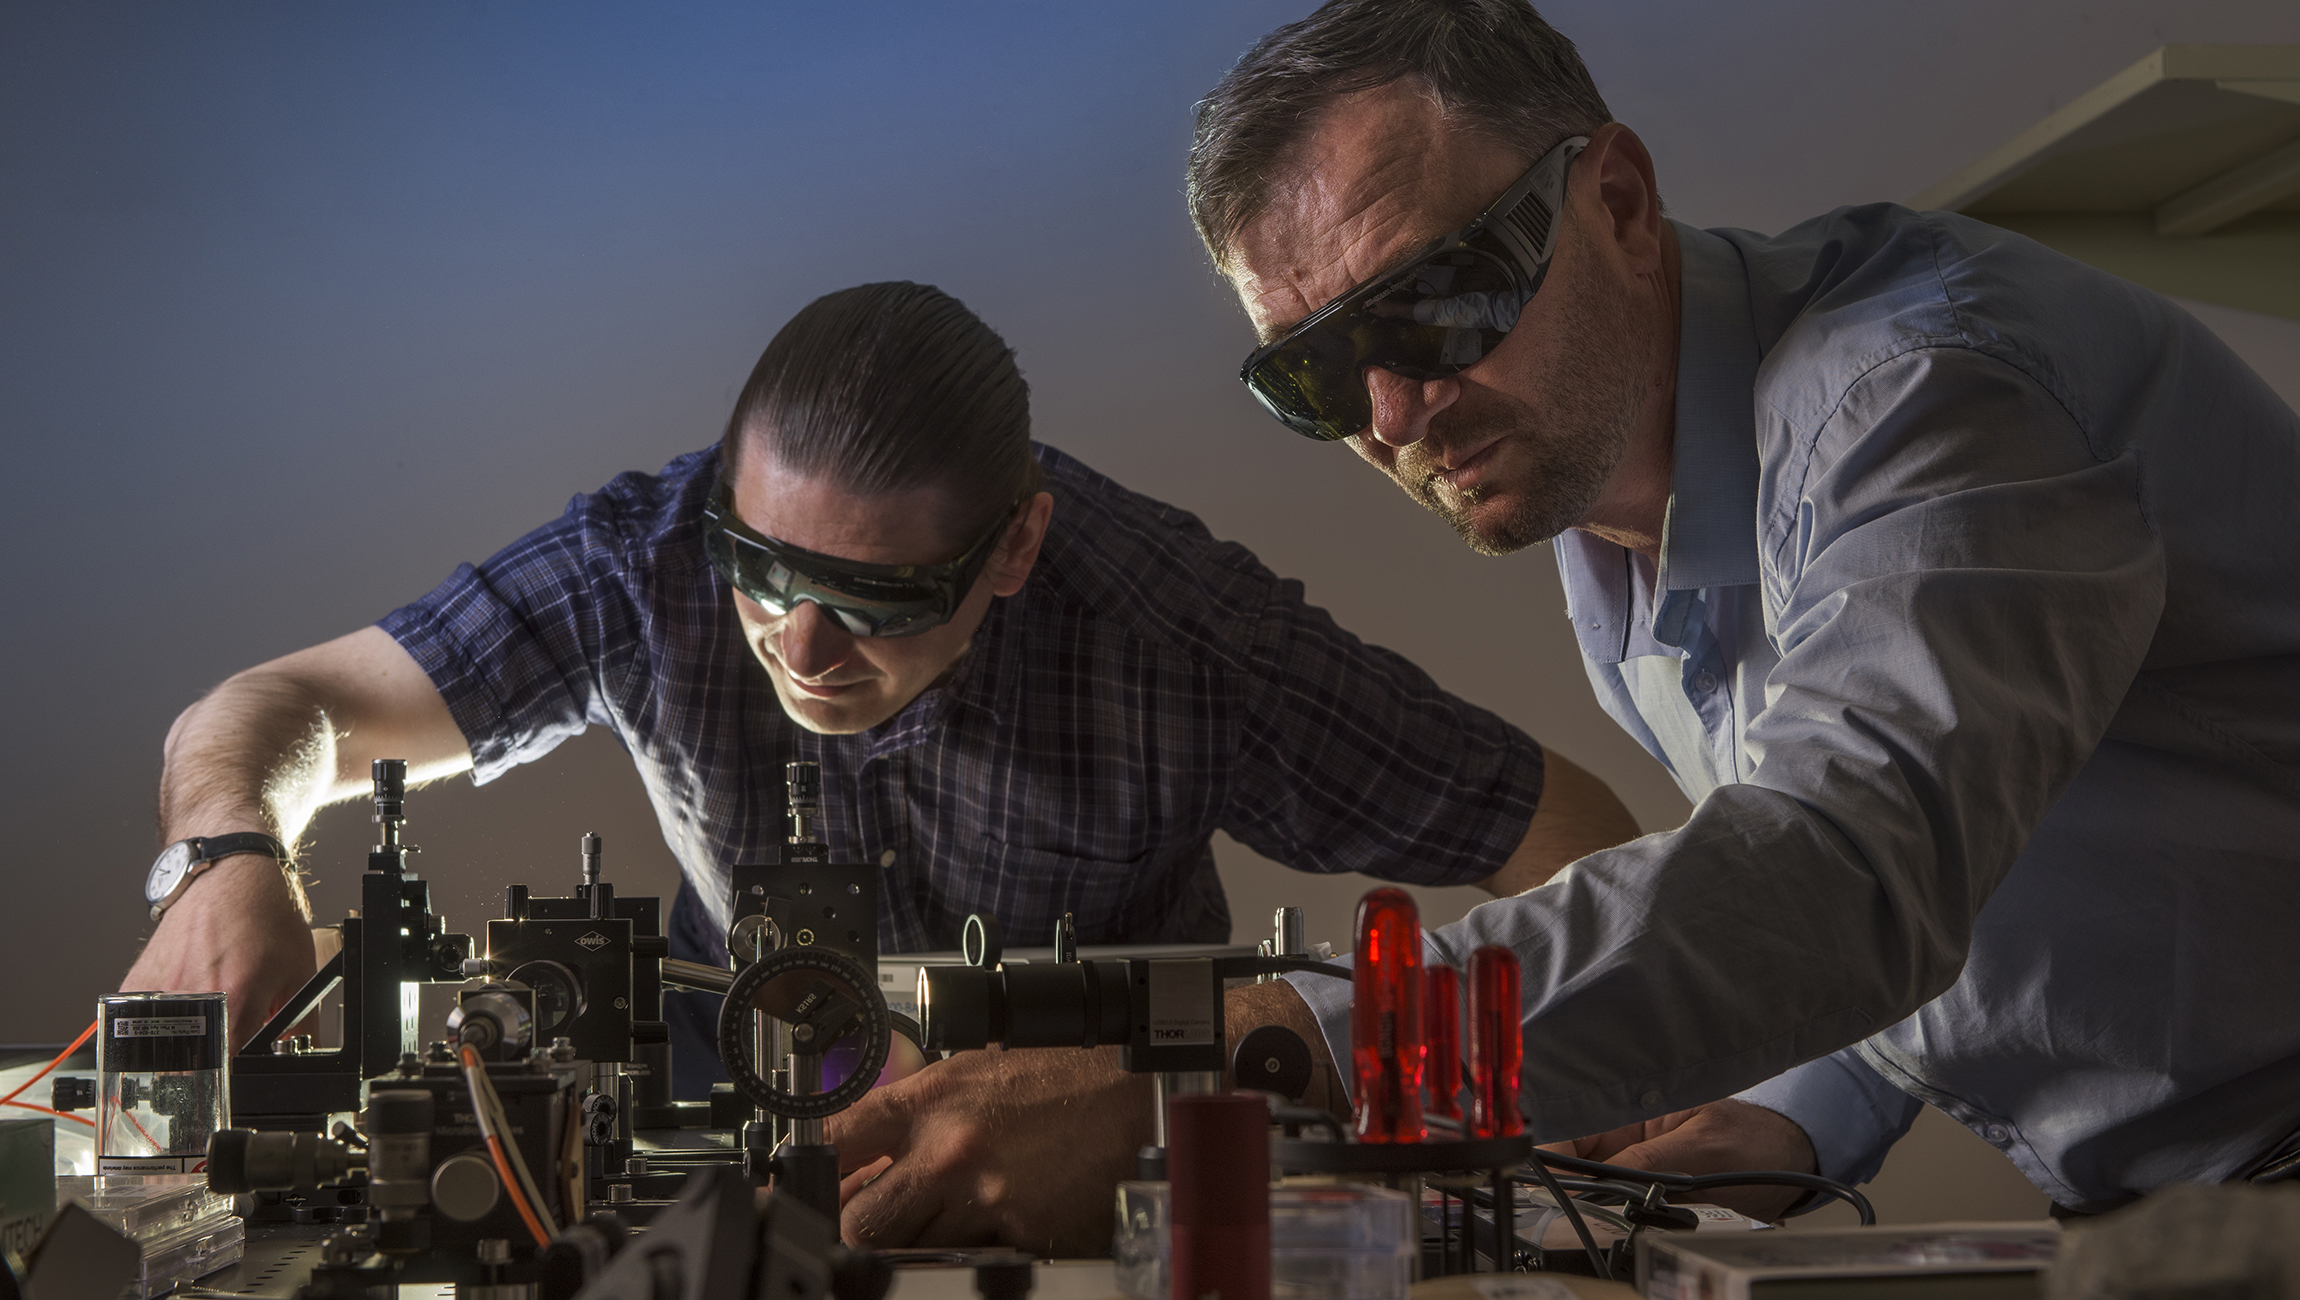 Professor Andrey Miroshnichenko, from UNSW Canberra, and Dr Vladlen Shvedov from the Australian National University photographed in a laser lab at UNSW Canberra.